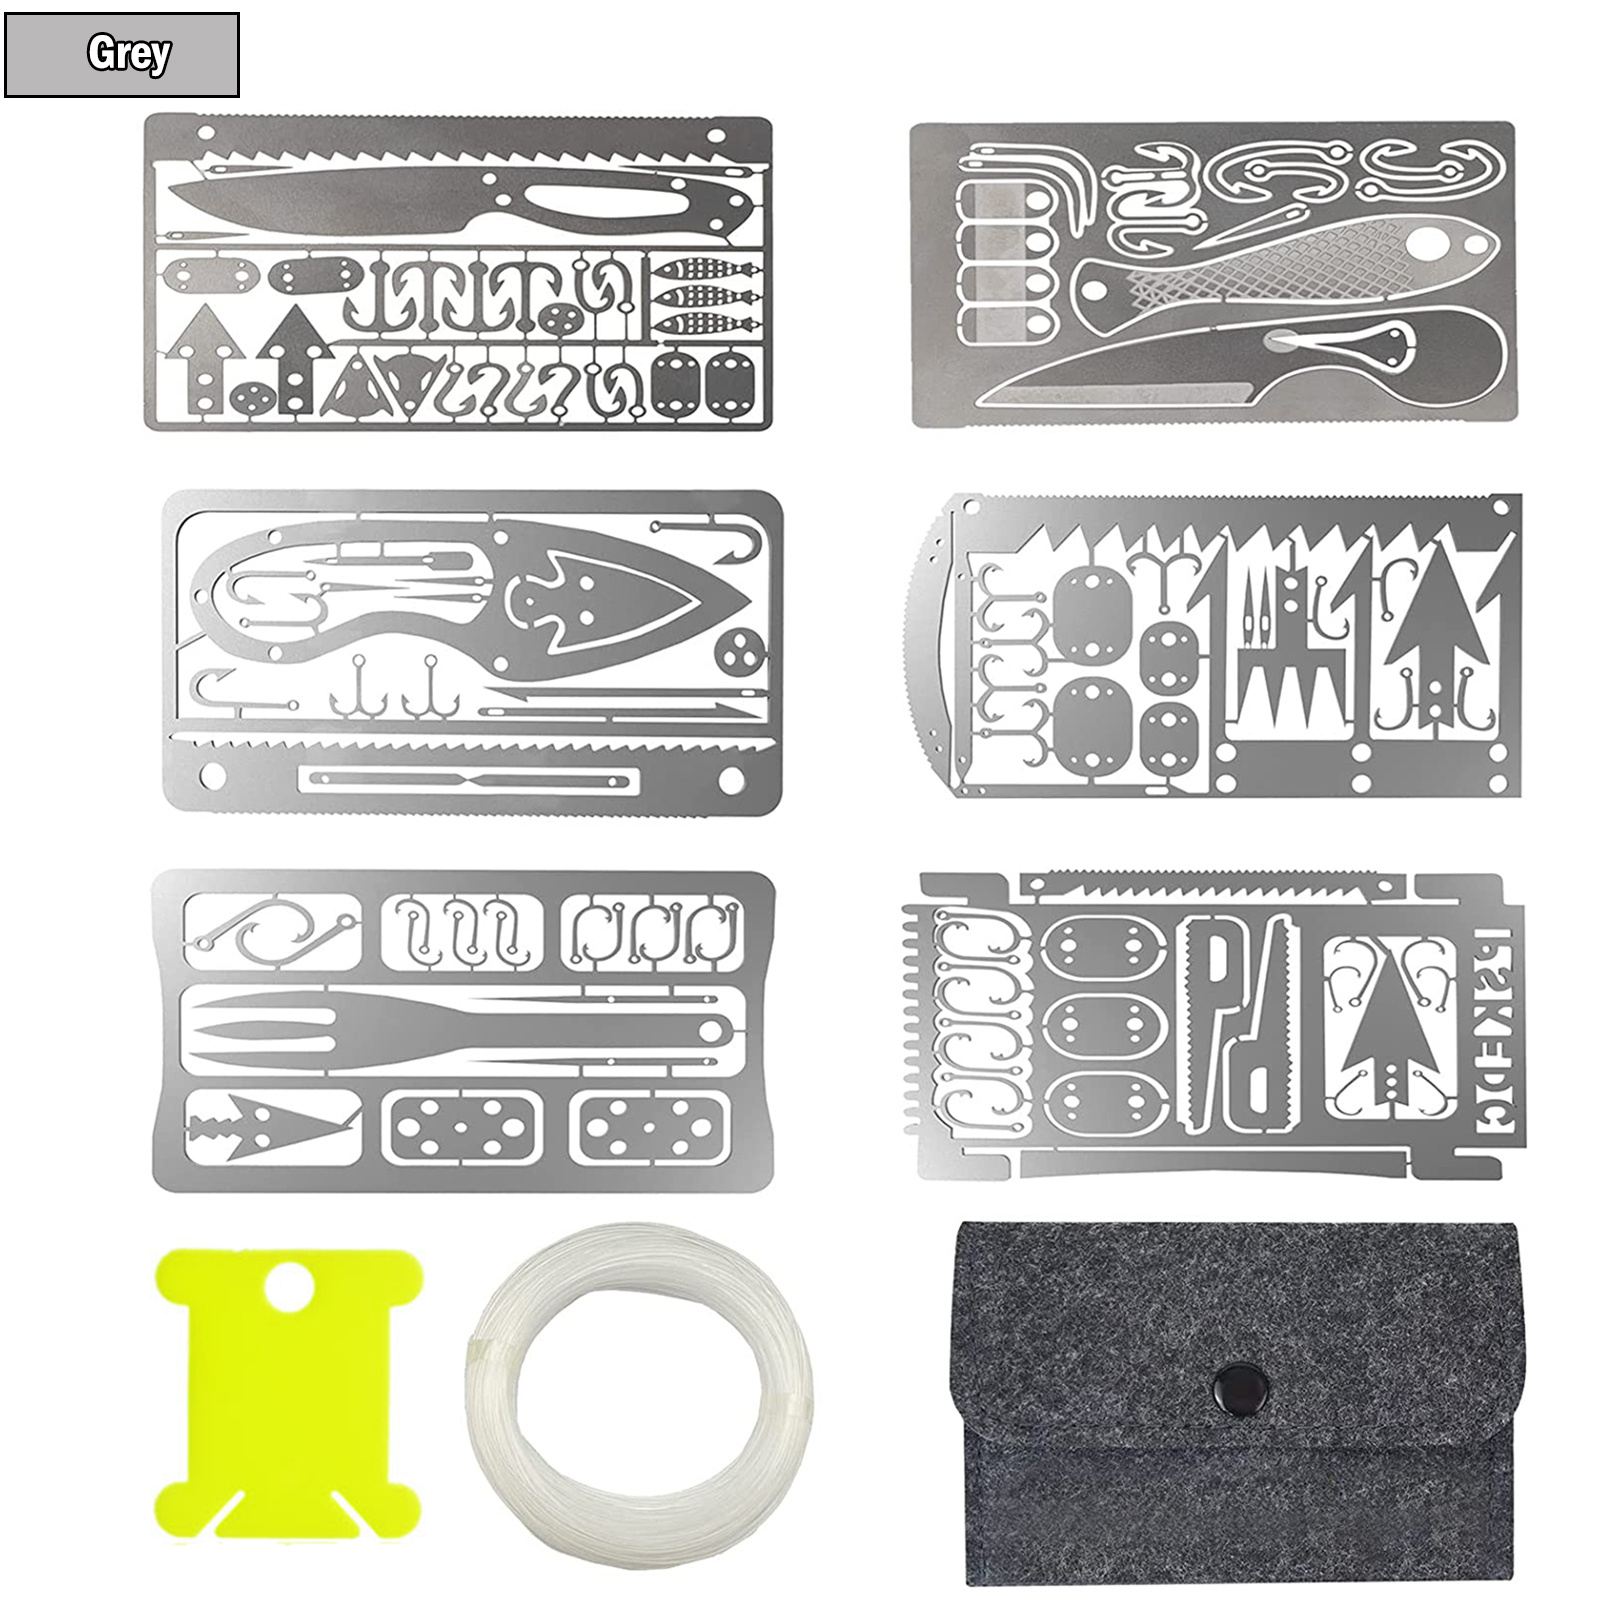 6 Piece Survival Card Multitool Edc Kit For Fishing Outdoor Hiking